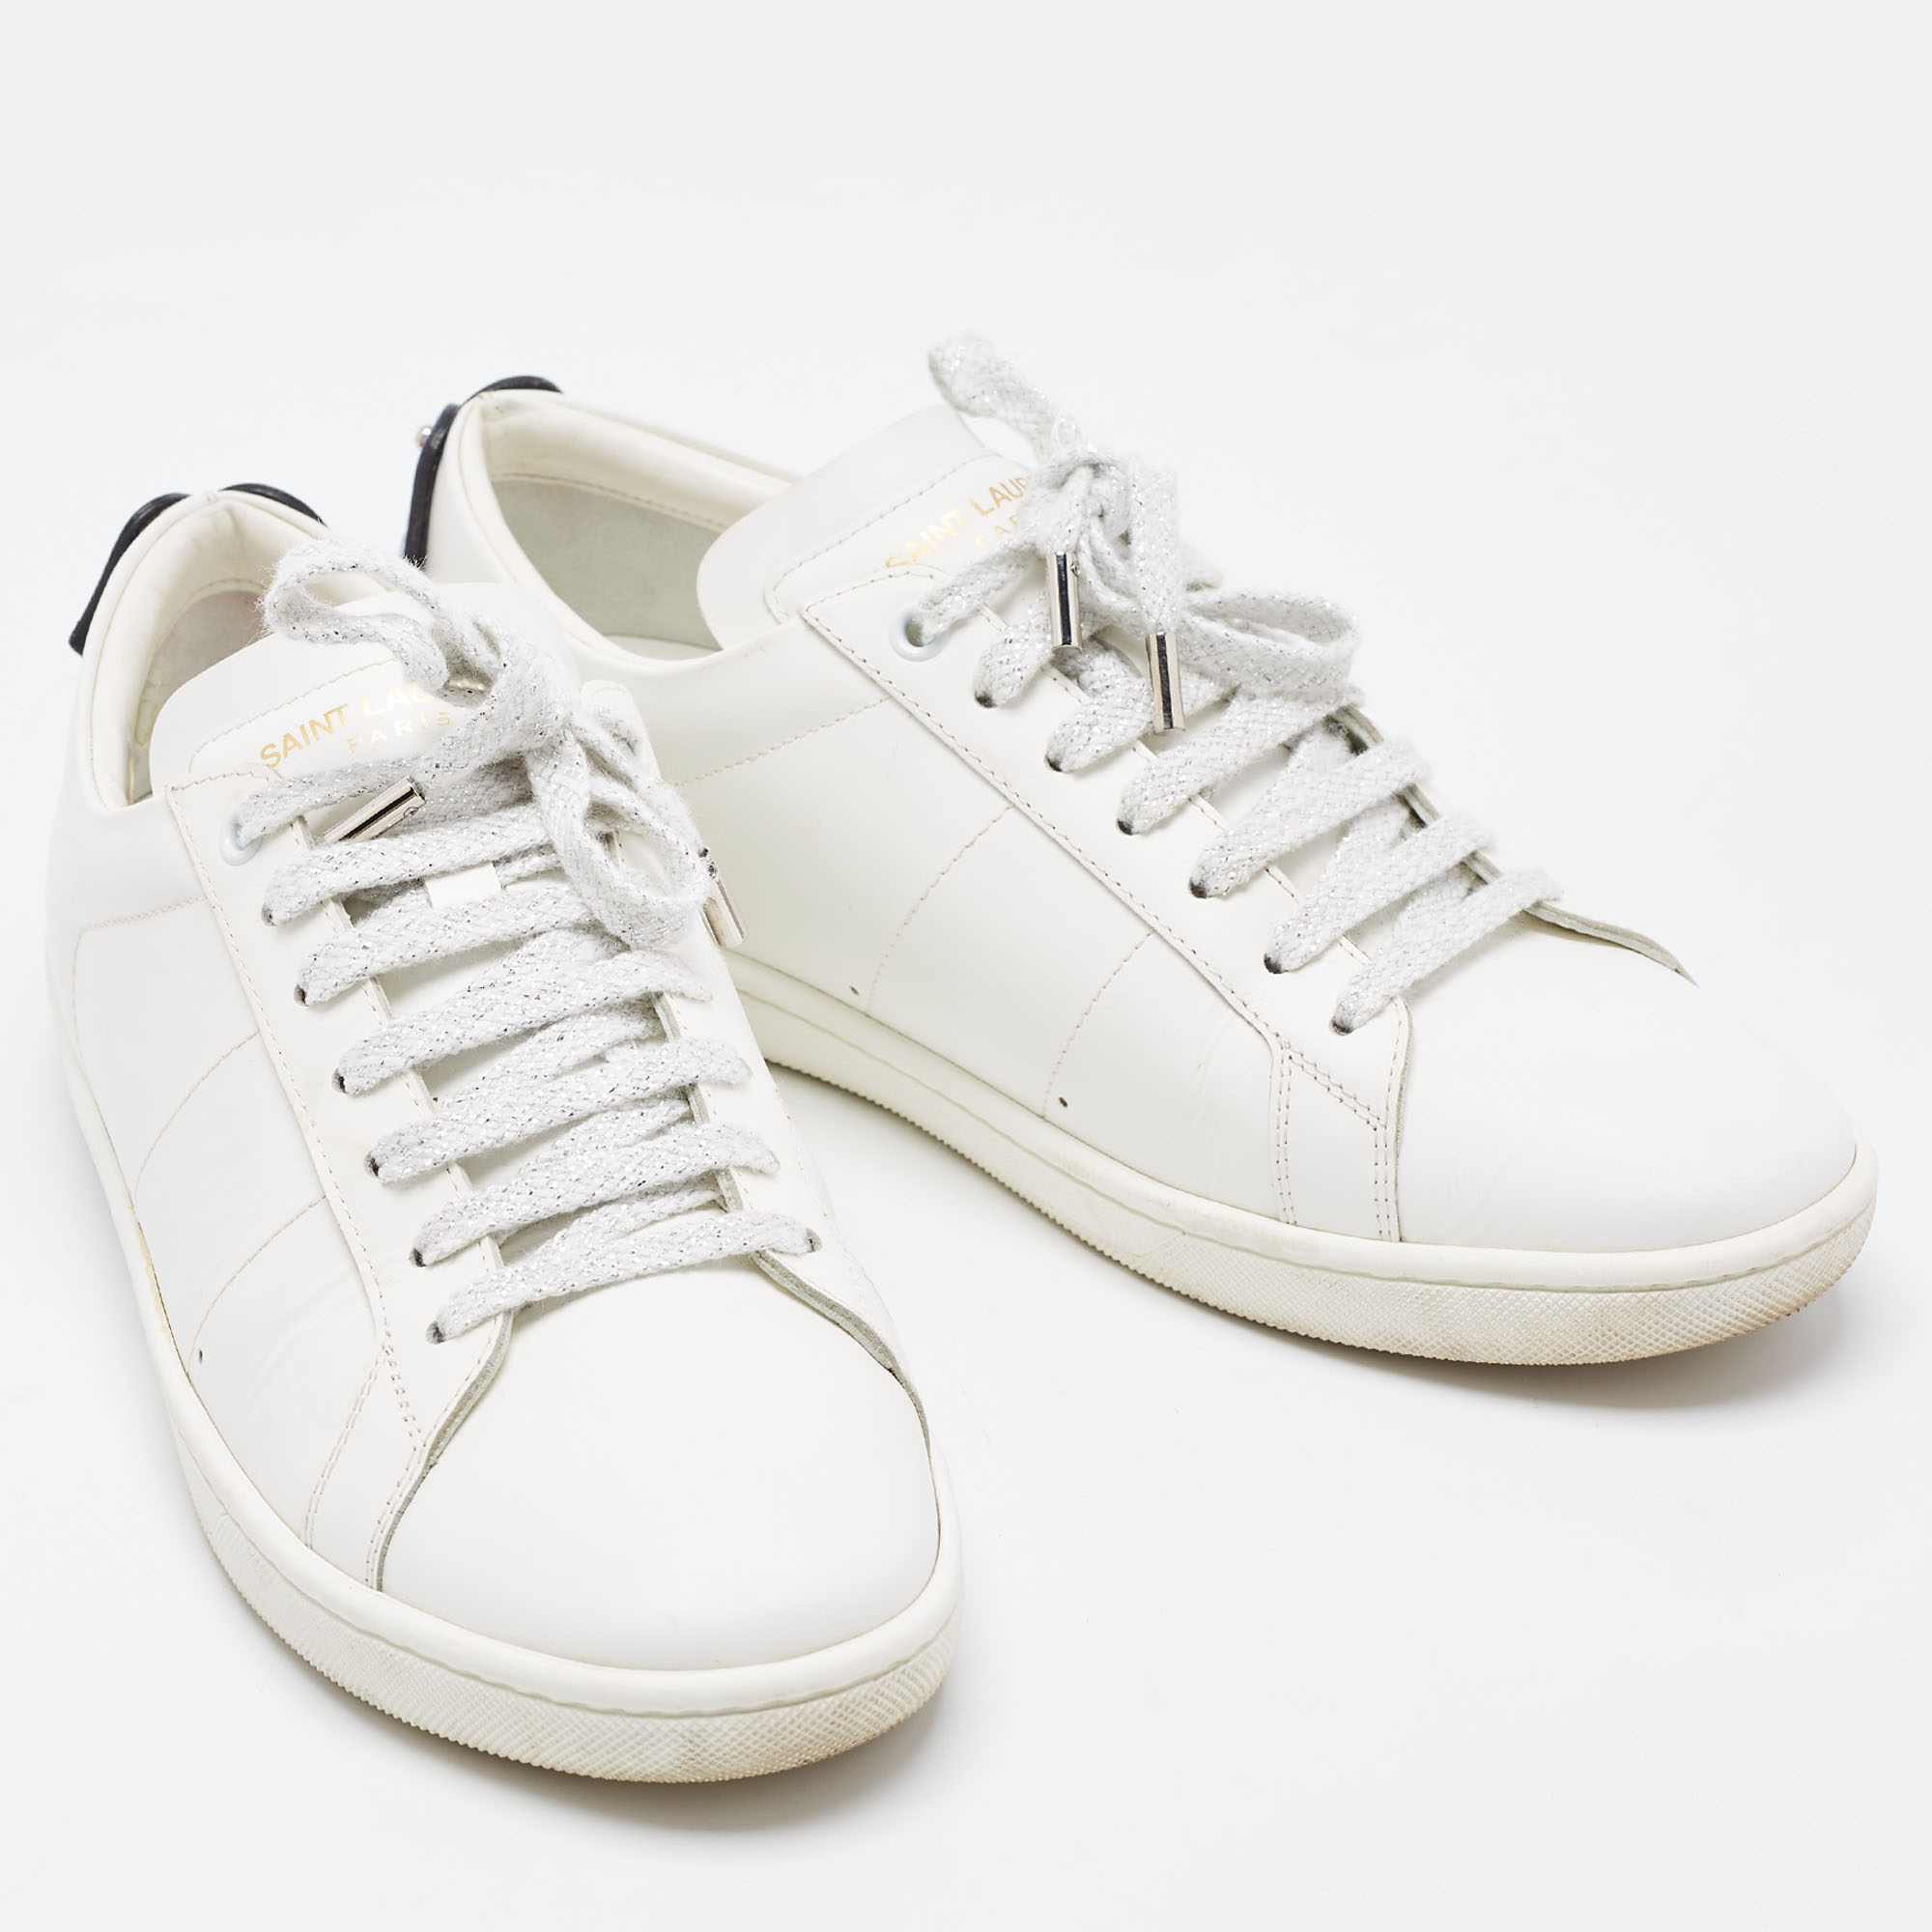 Saint Laurent White Leather Court Classic Sneakers Size 39